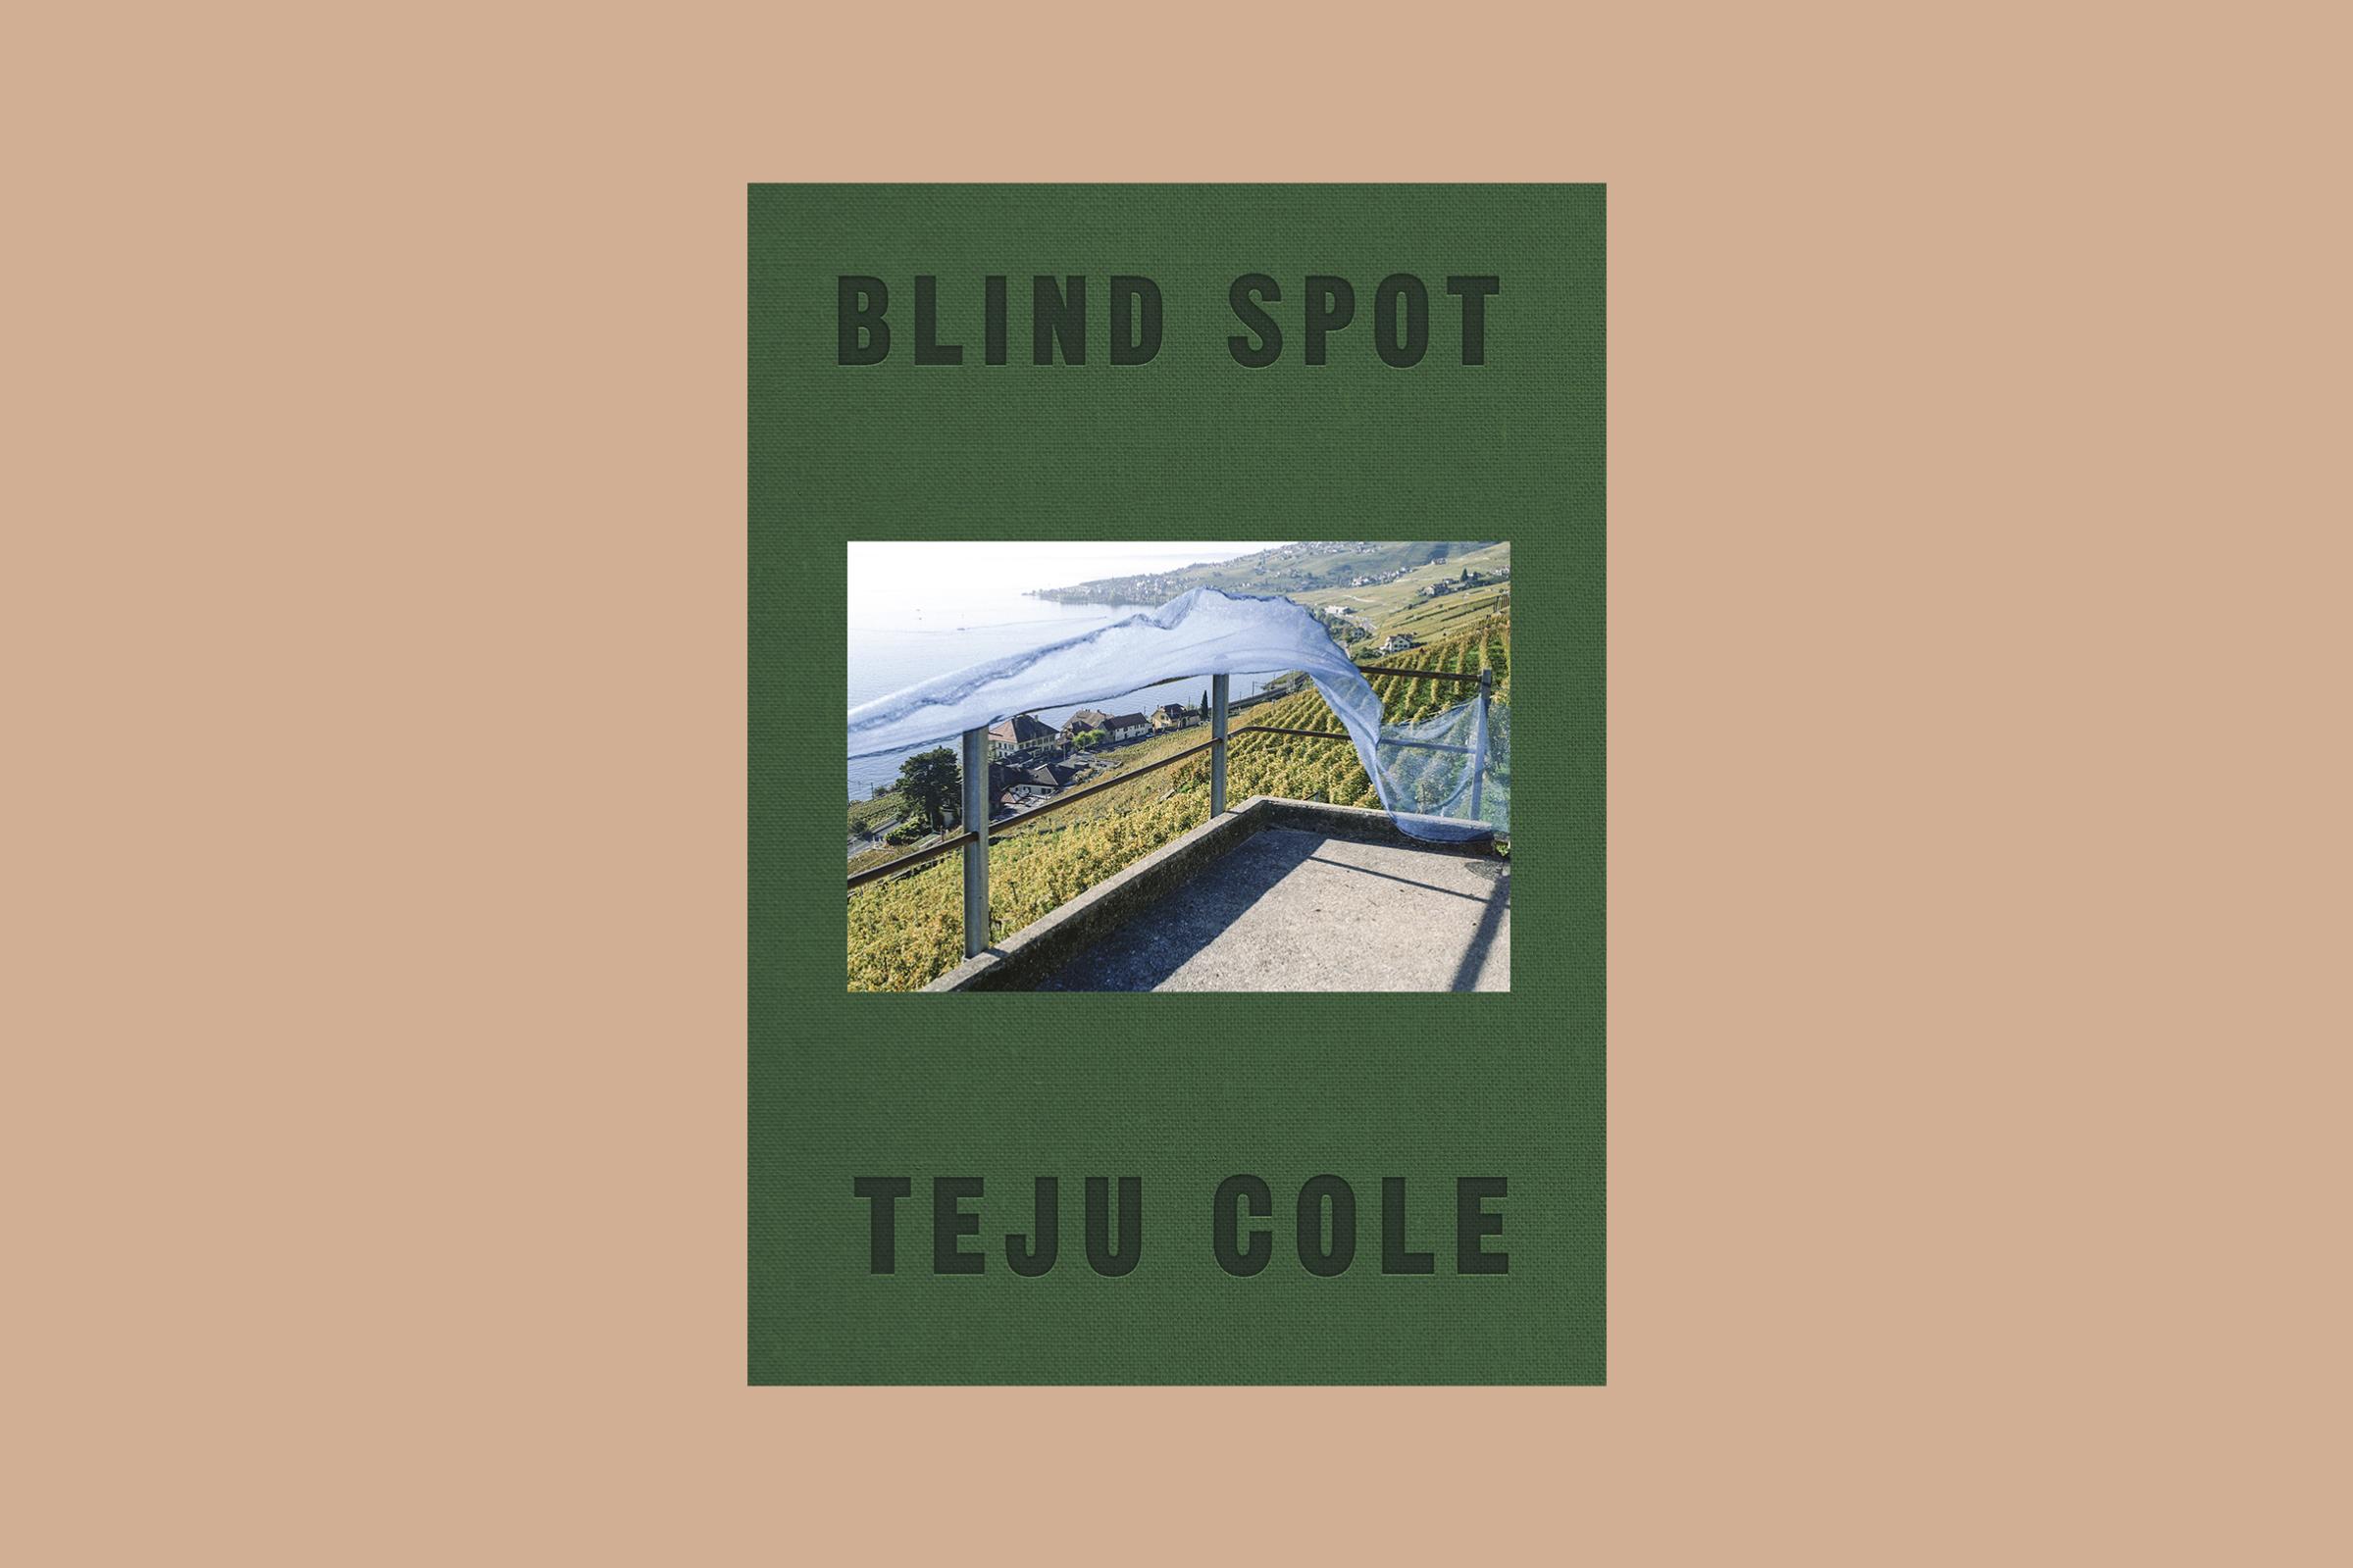 Blind Spot is one of the top 10 non-fiction books of 2017